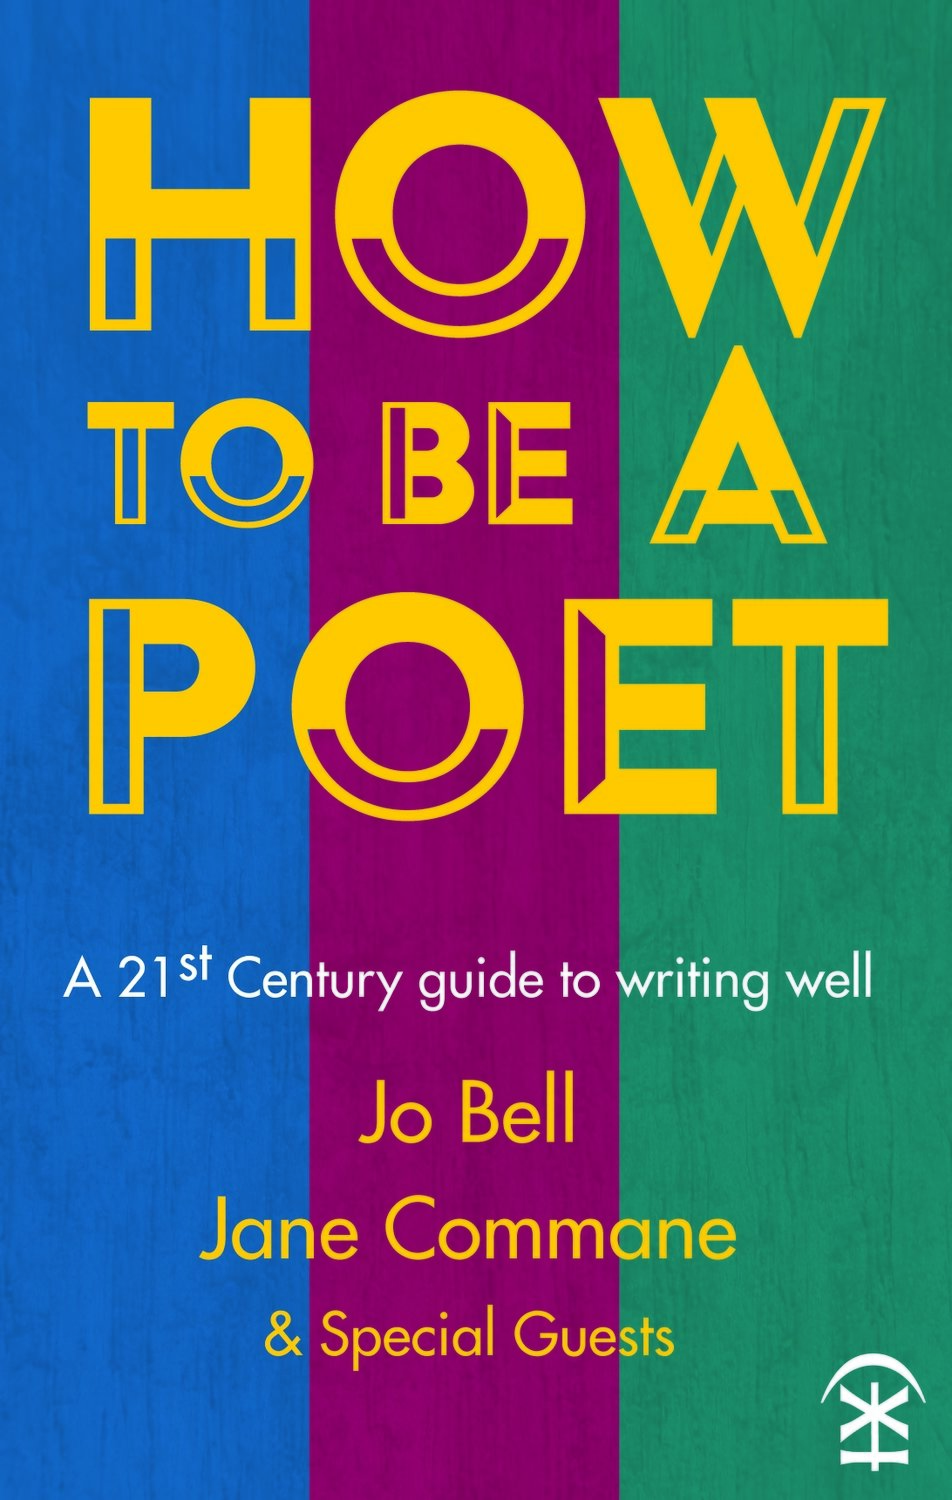 How to be a Poet: Jo Bell and Jane Commane